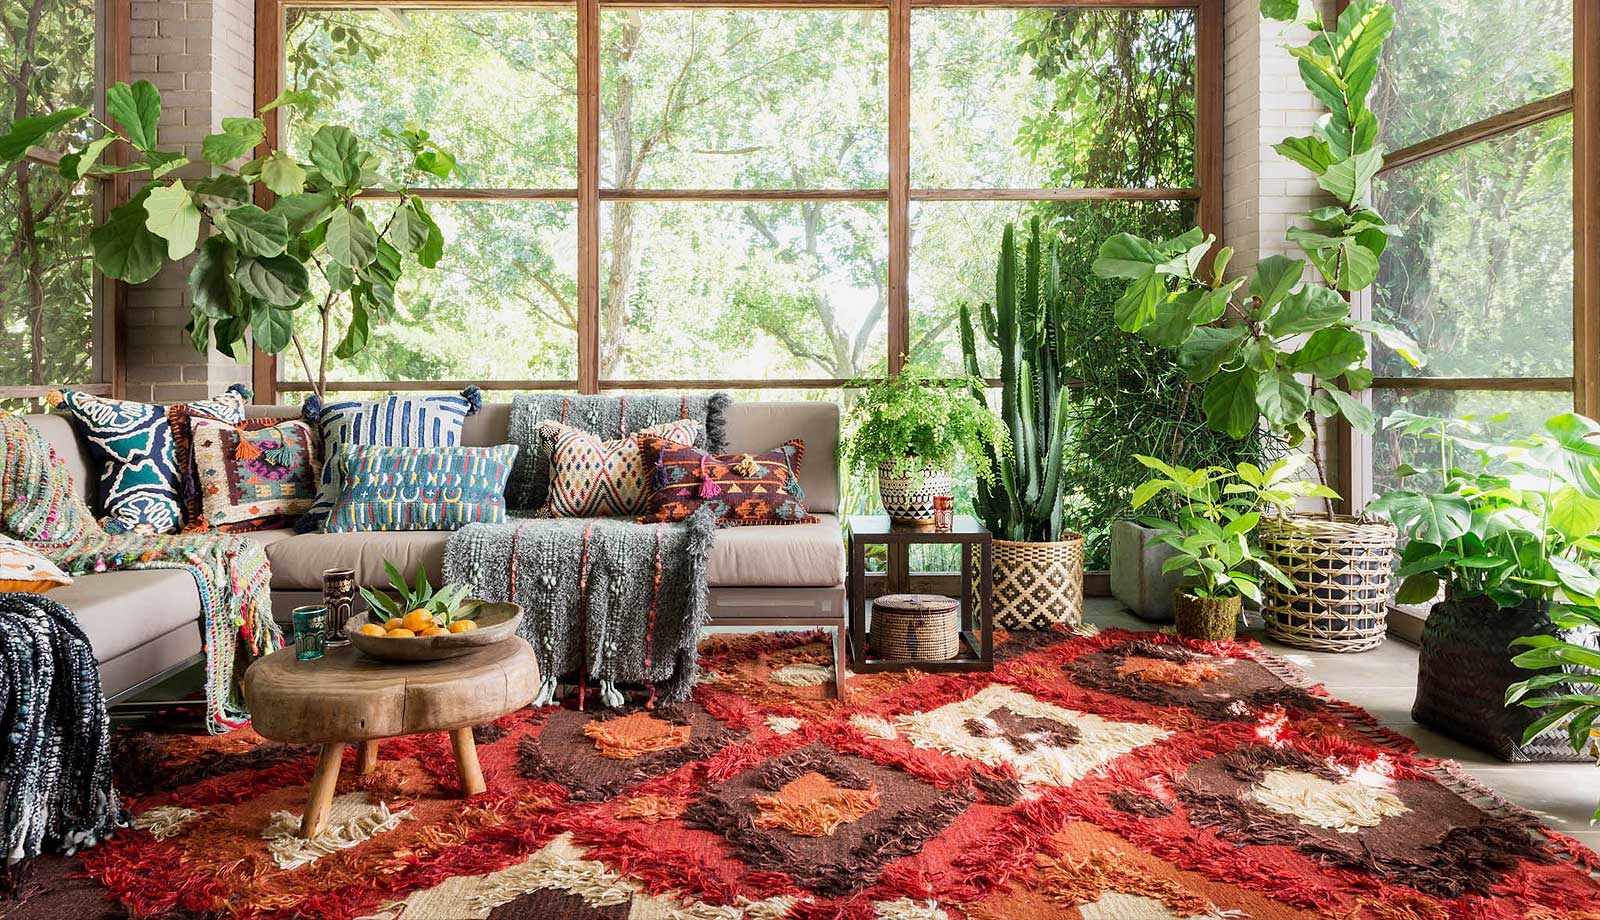 Where Does the Word “Kilim” Come From?